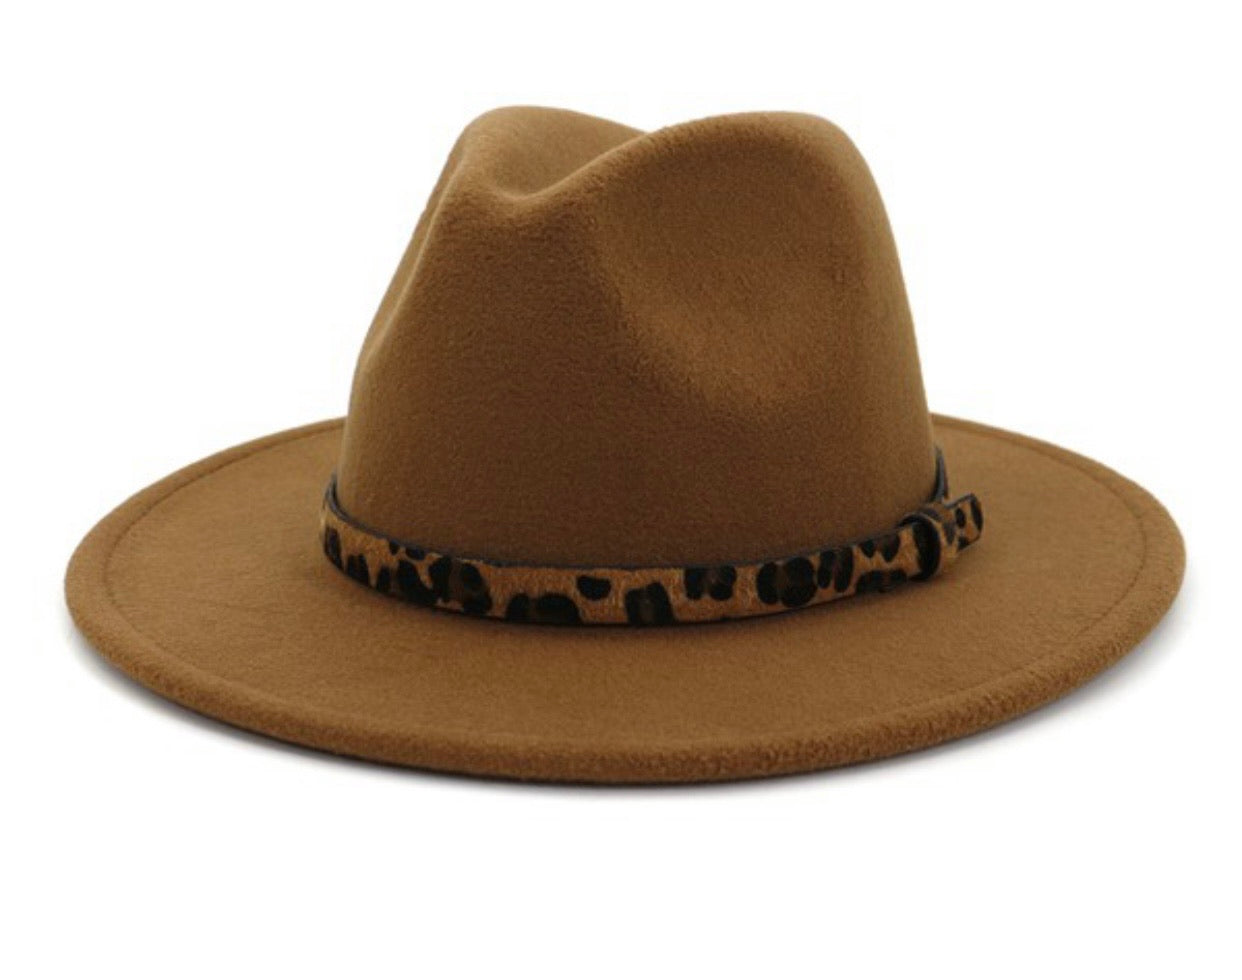 "Stay In Your Lane" Fedora Hats